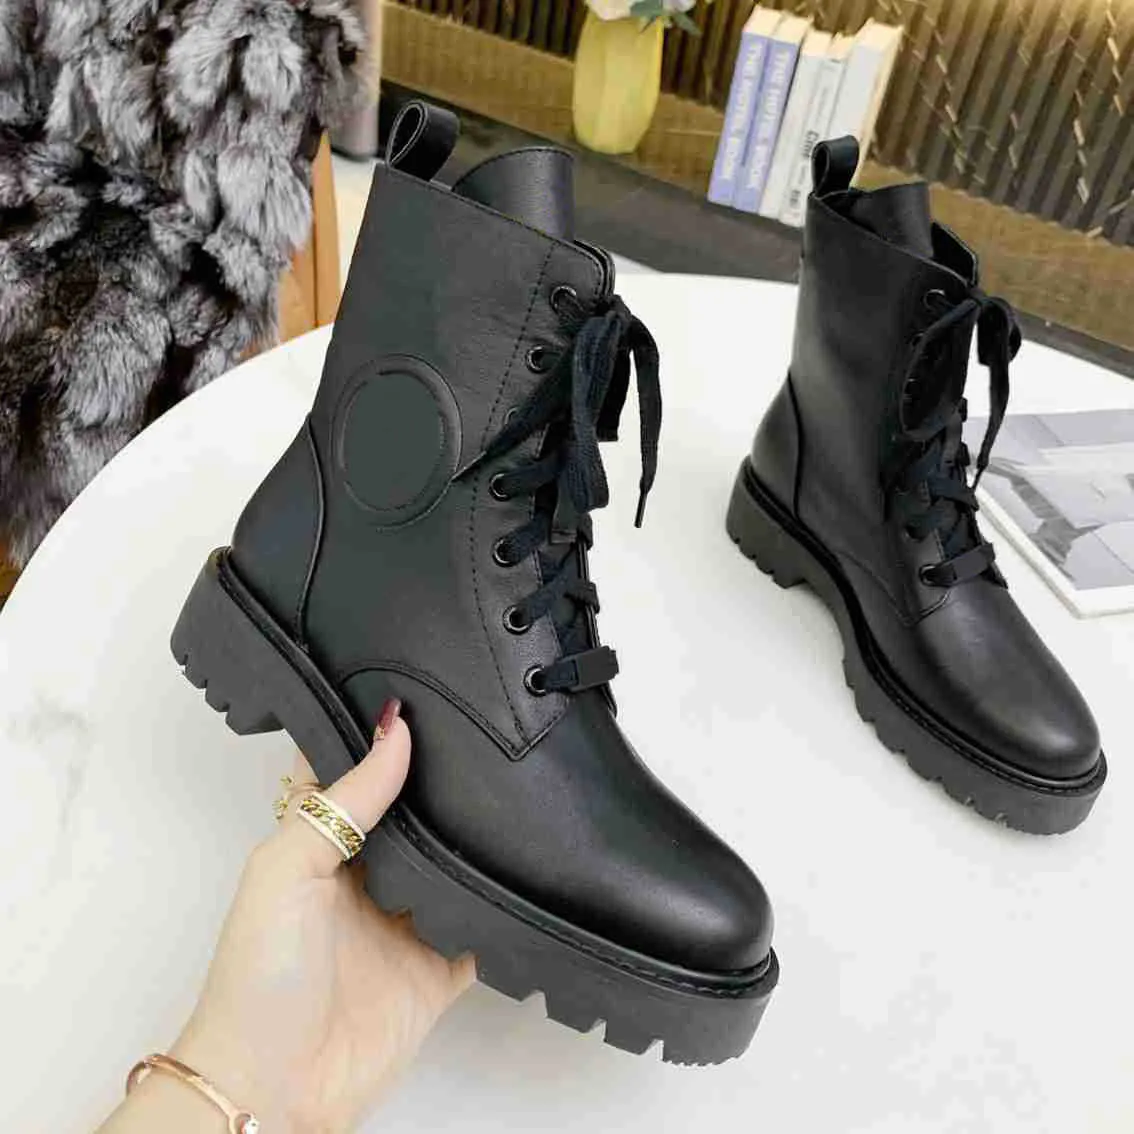 Top quality women's fashion lace-up leather boots Designers new Brand wholesale casual water proof boot women round head thick heel non-slip shoes